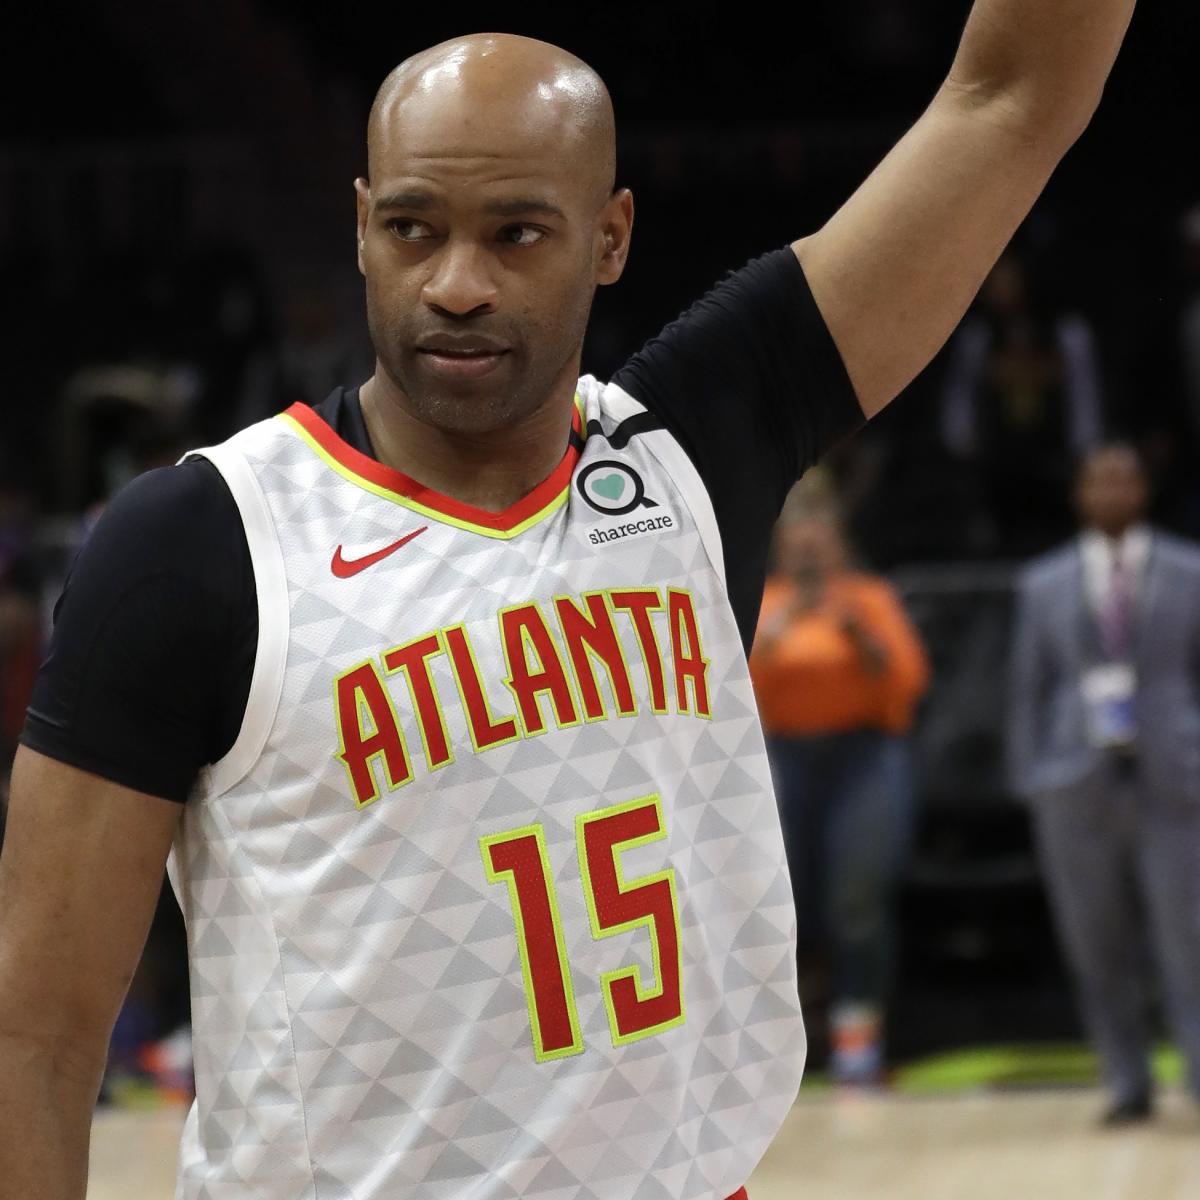 Vince Carter Has 1 Glaring Hole on His $172 Million Hall of Fame Resume